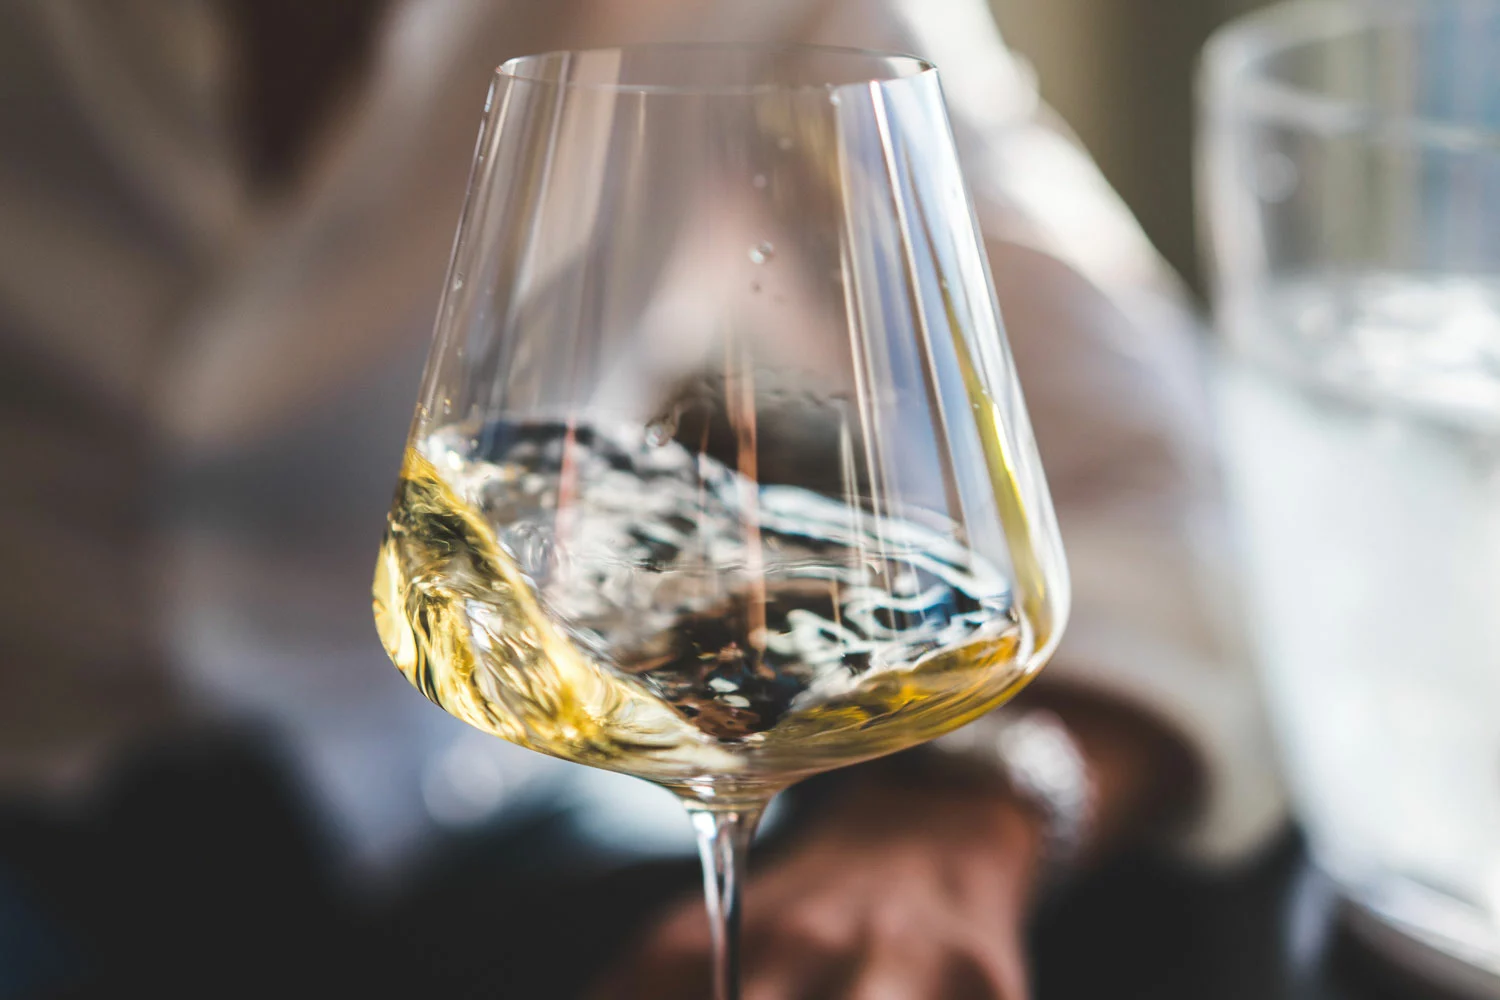 A person is holding a glass of white wine.